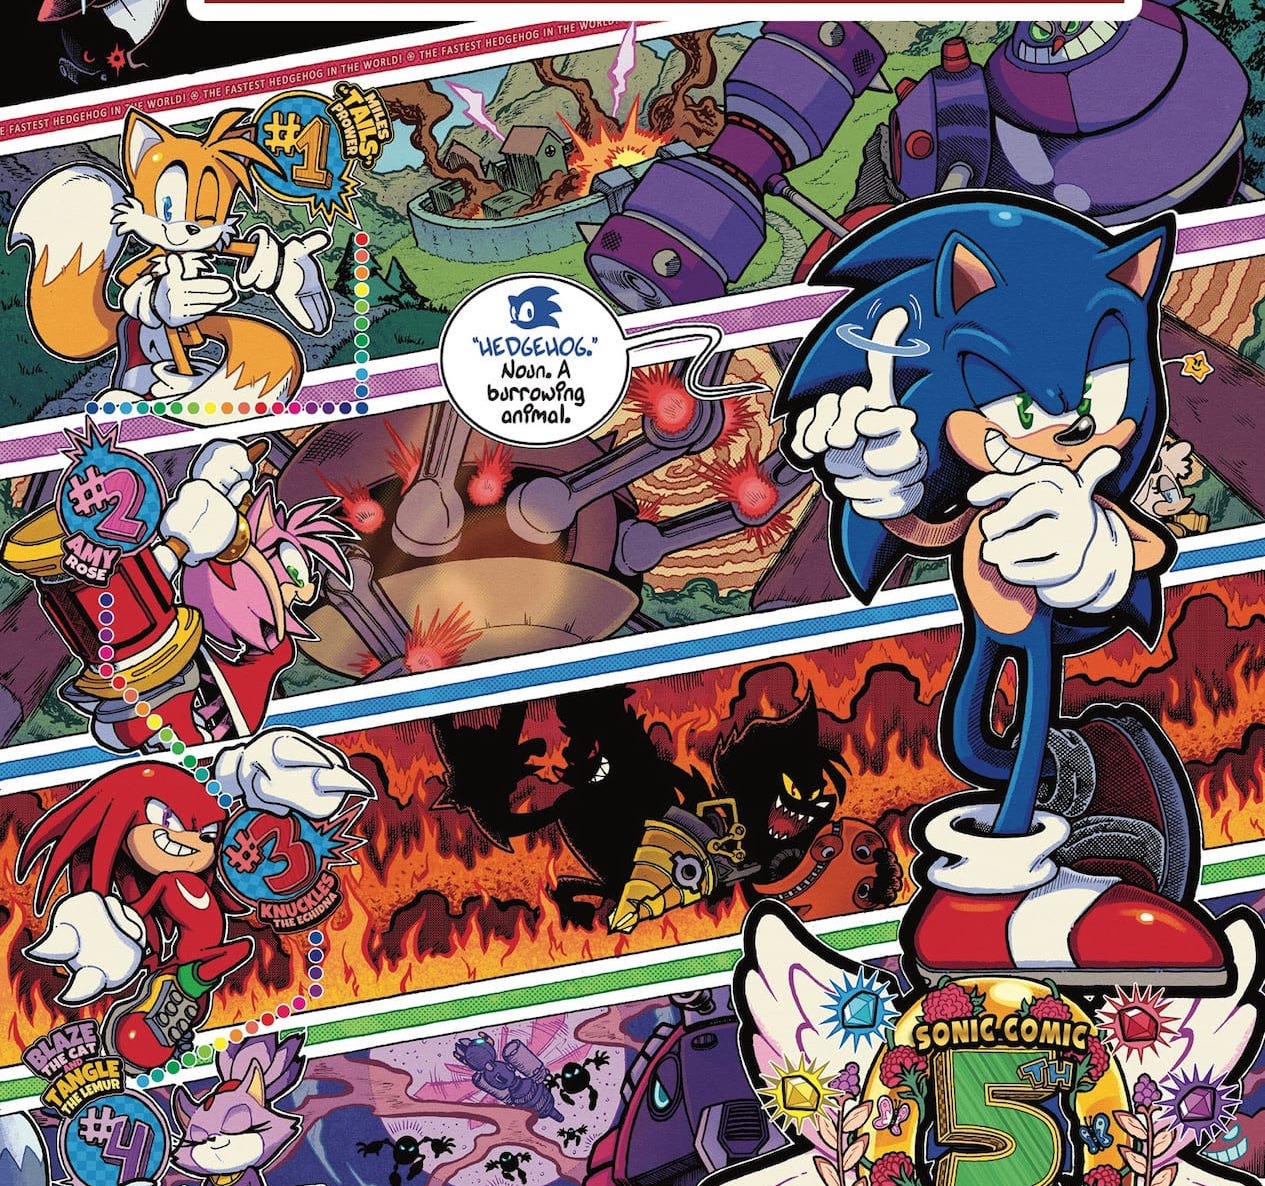 IDW Celebrates a 'Way Past Cool' with 'Sonic The Hedgehog' #1 fifth anniversary edition